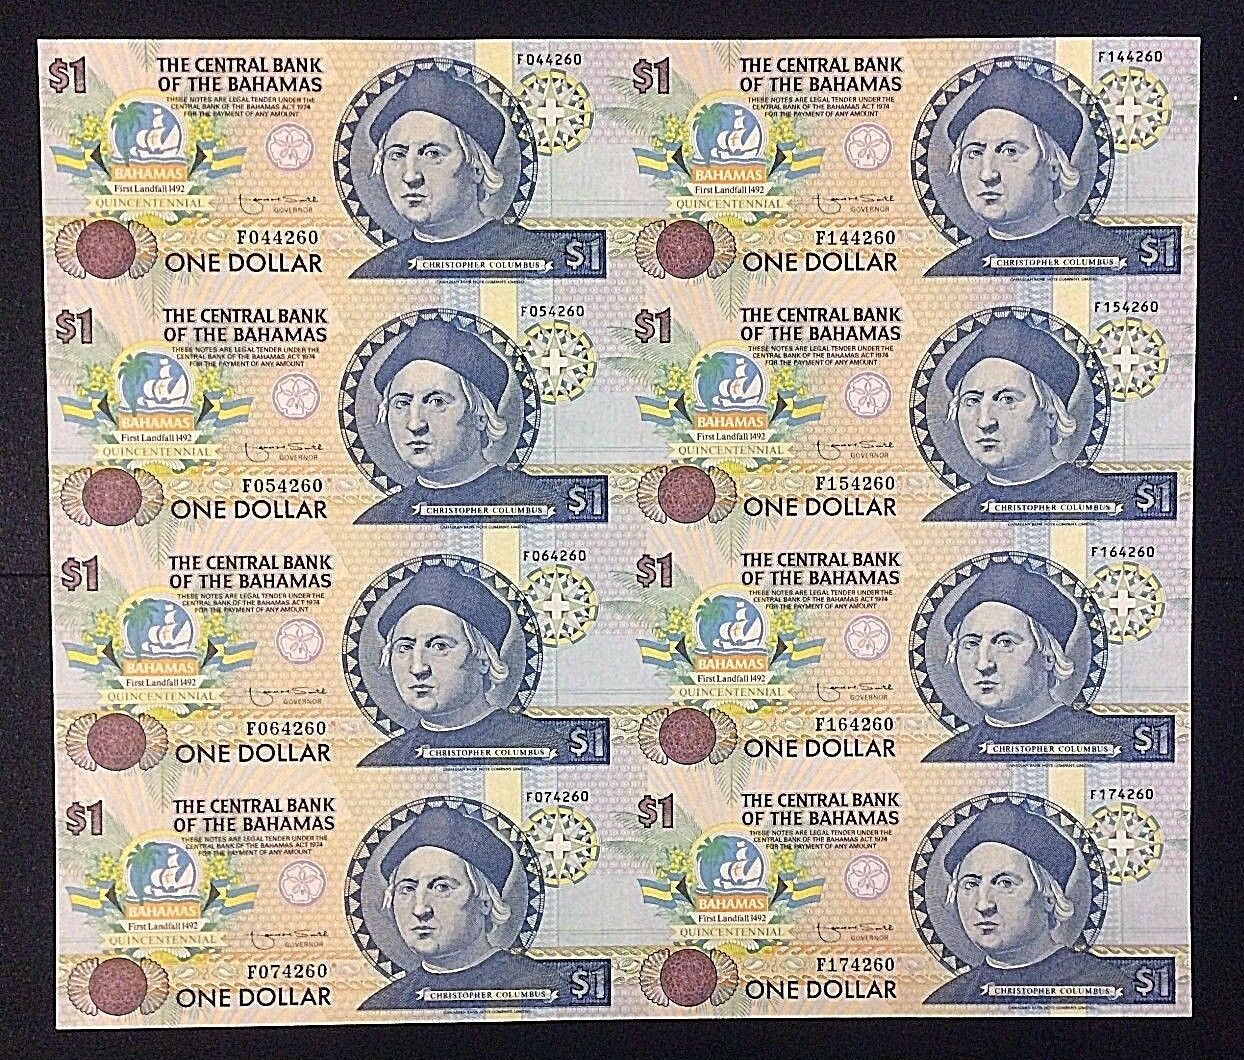 UNCUT SHEET of 8 BAHAMAS $1 COLUMBUS PICK 50 of 1992 in PRISTINE UNC CONDITION